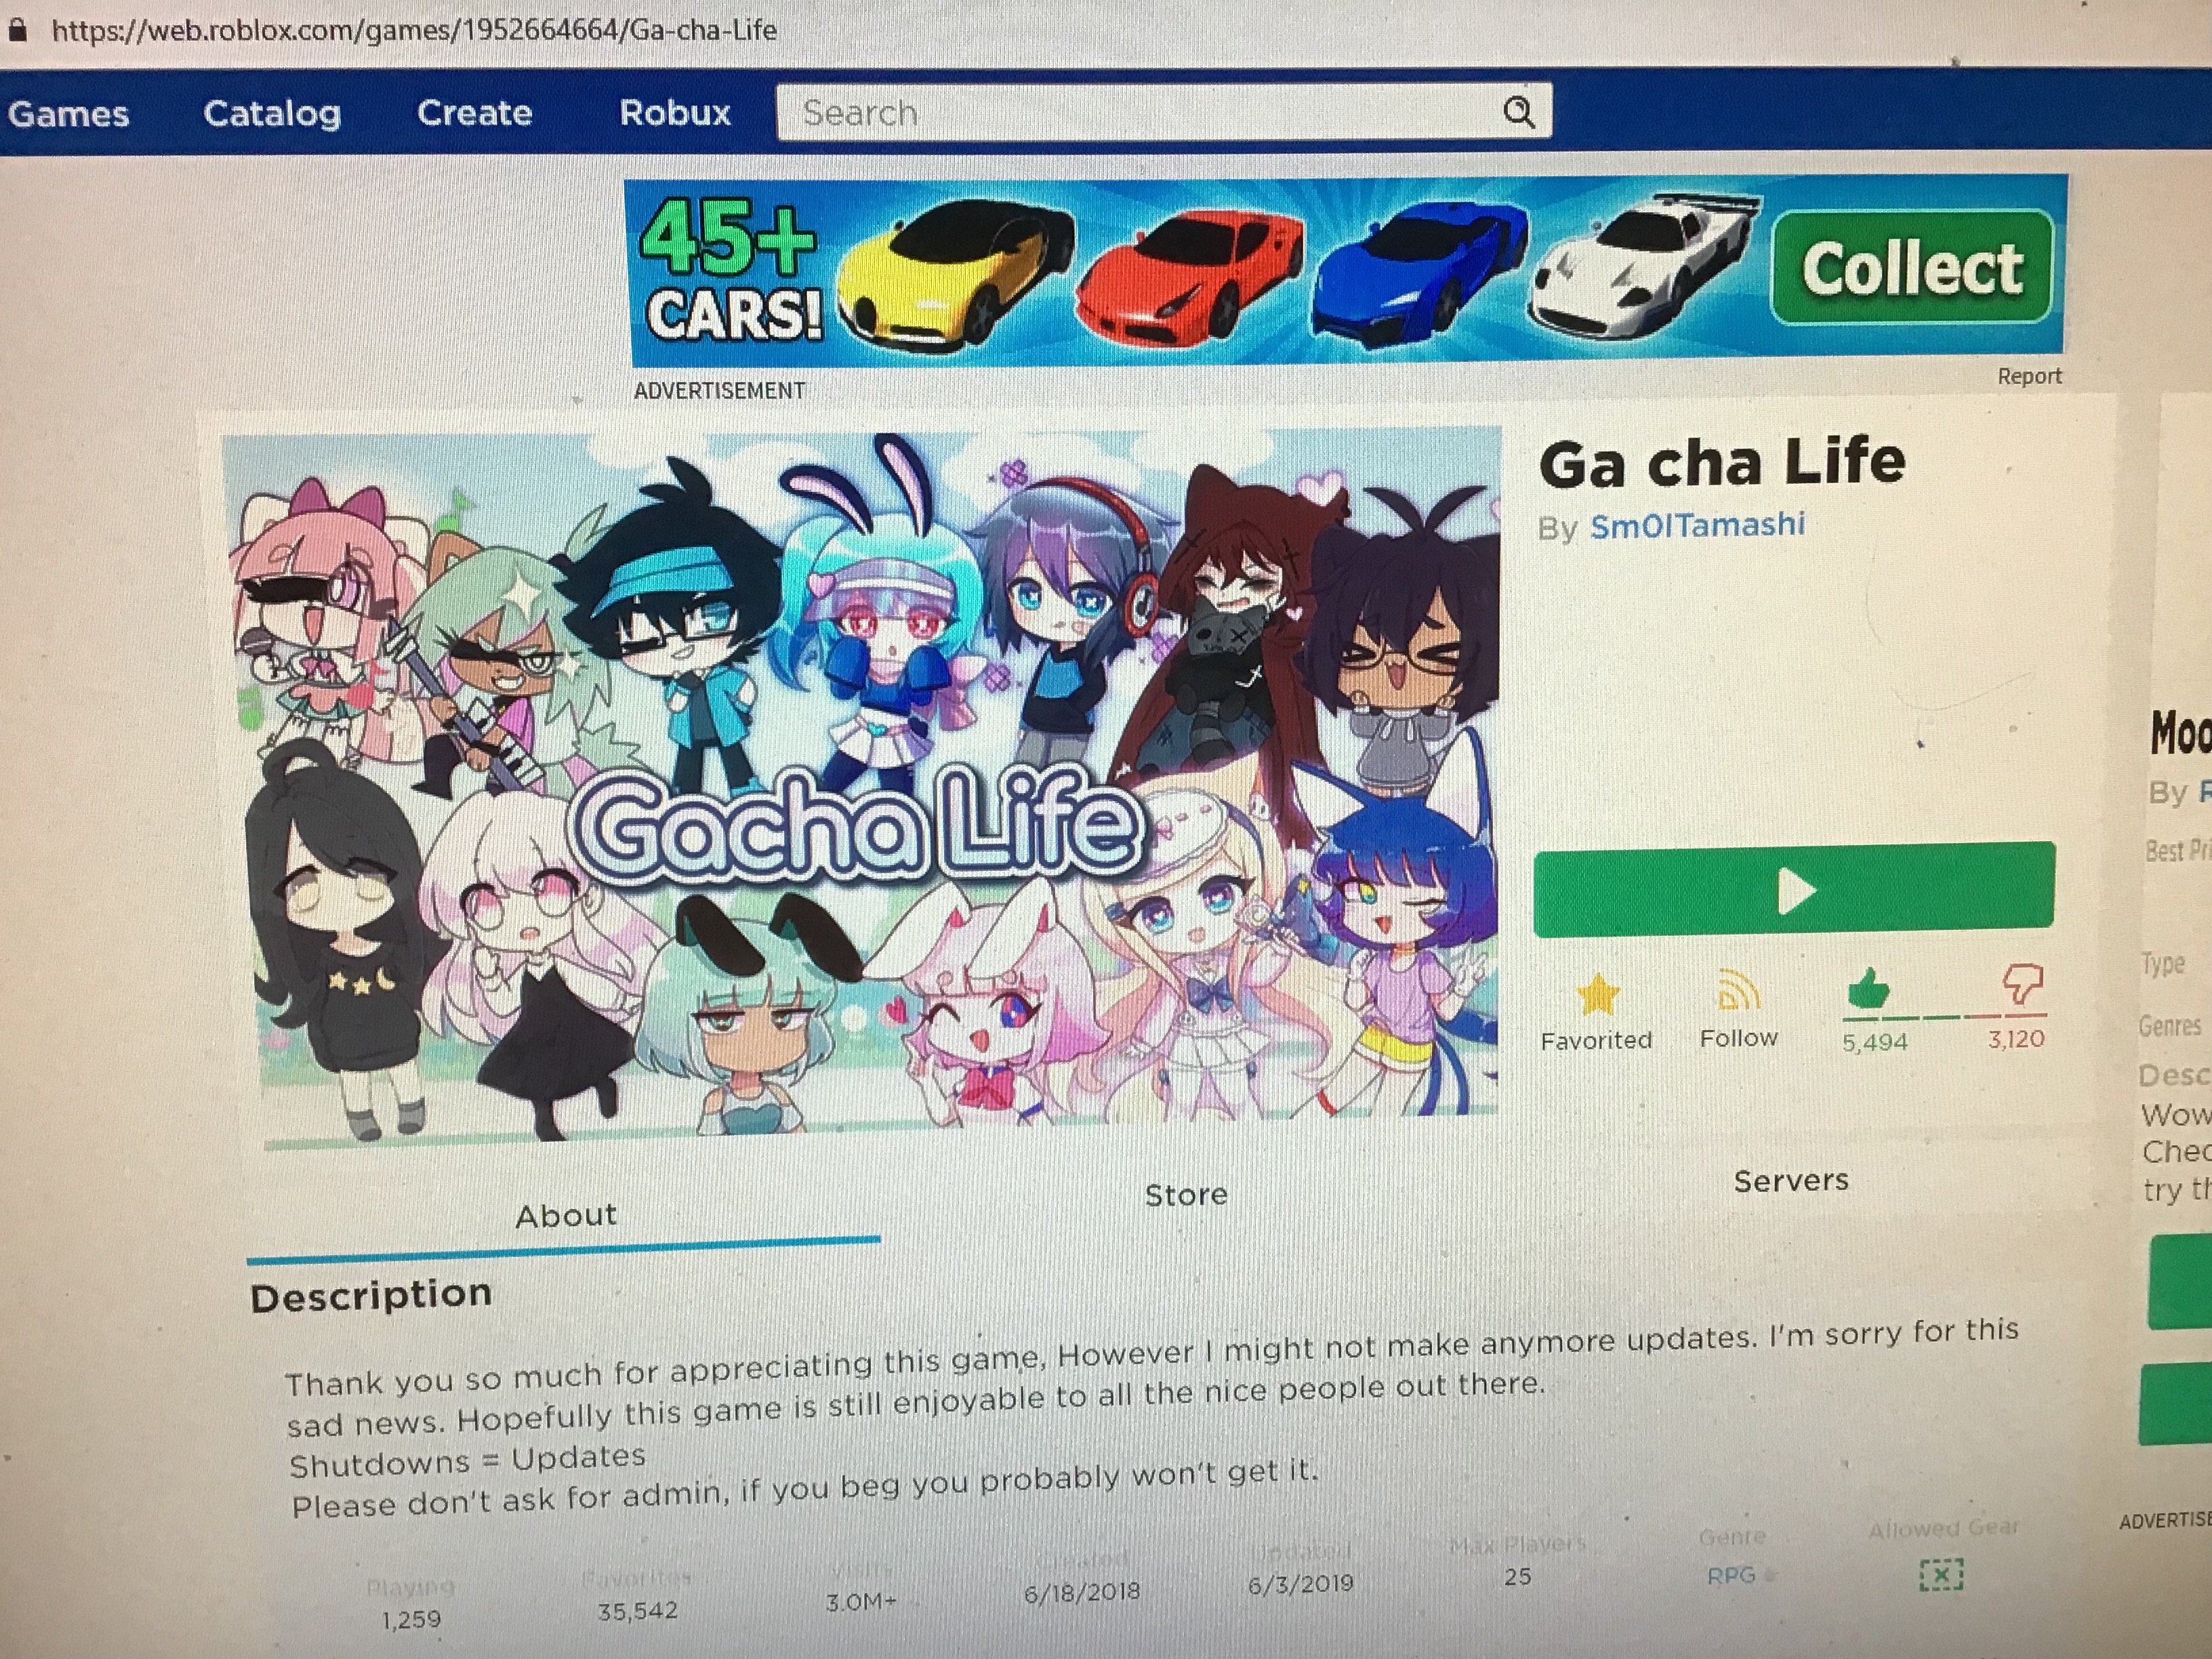 Roblox Gachalife Playnow Irl Me Image By E - how to get rid of hashtags in roblox 2018 roblox do you